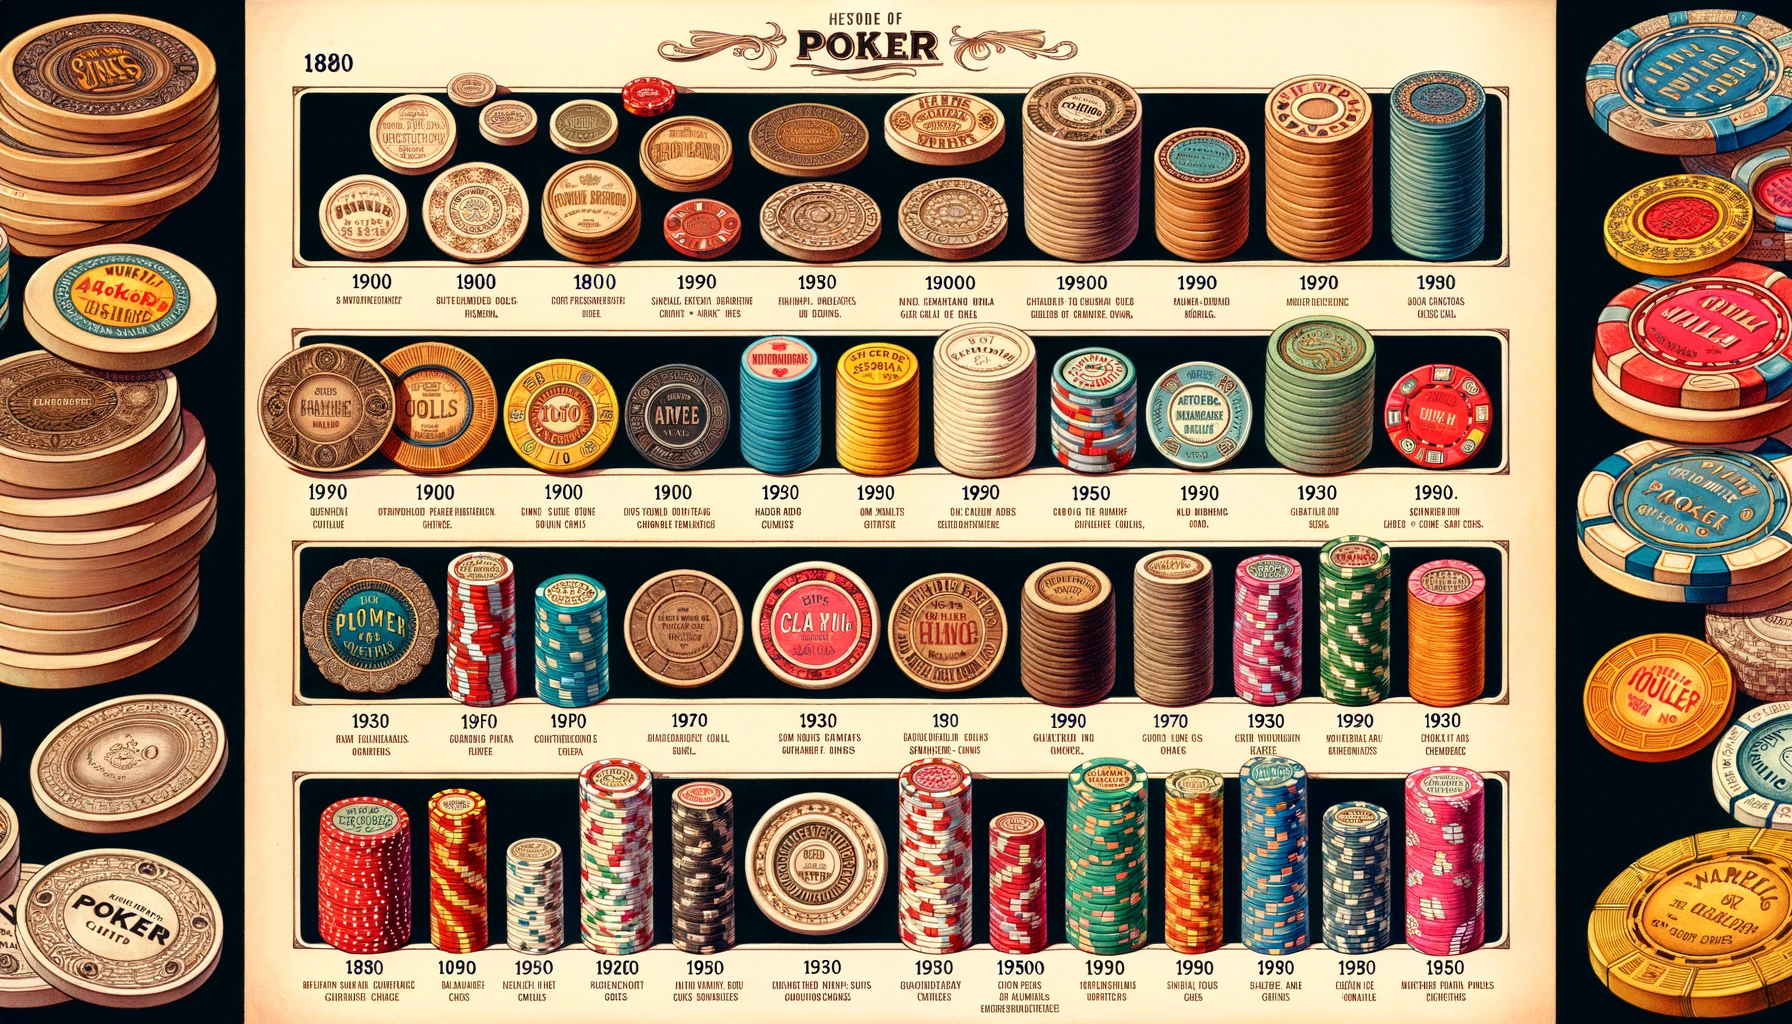 How the Poker Chip has Evolved